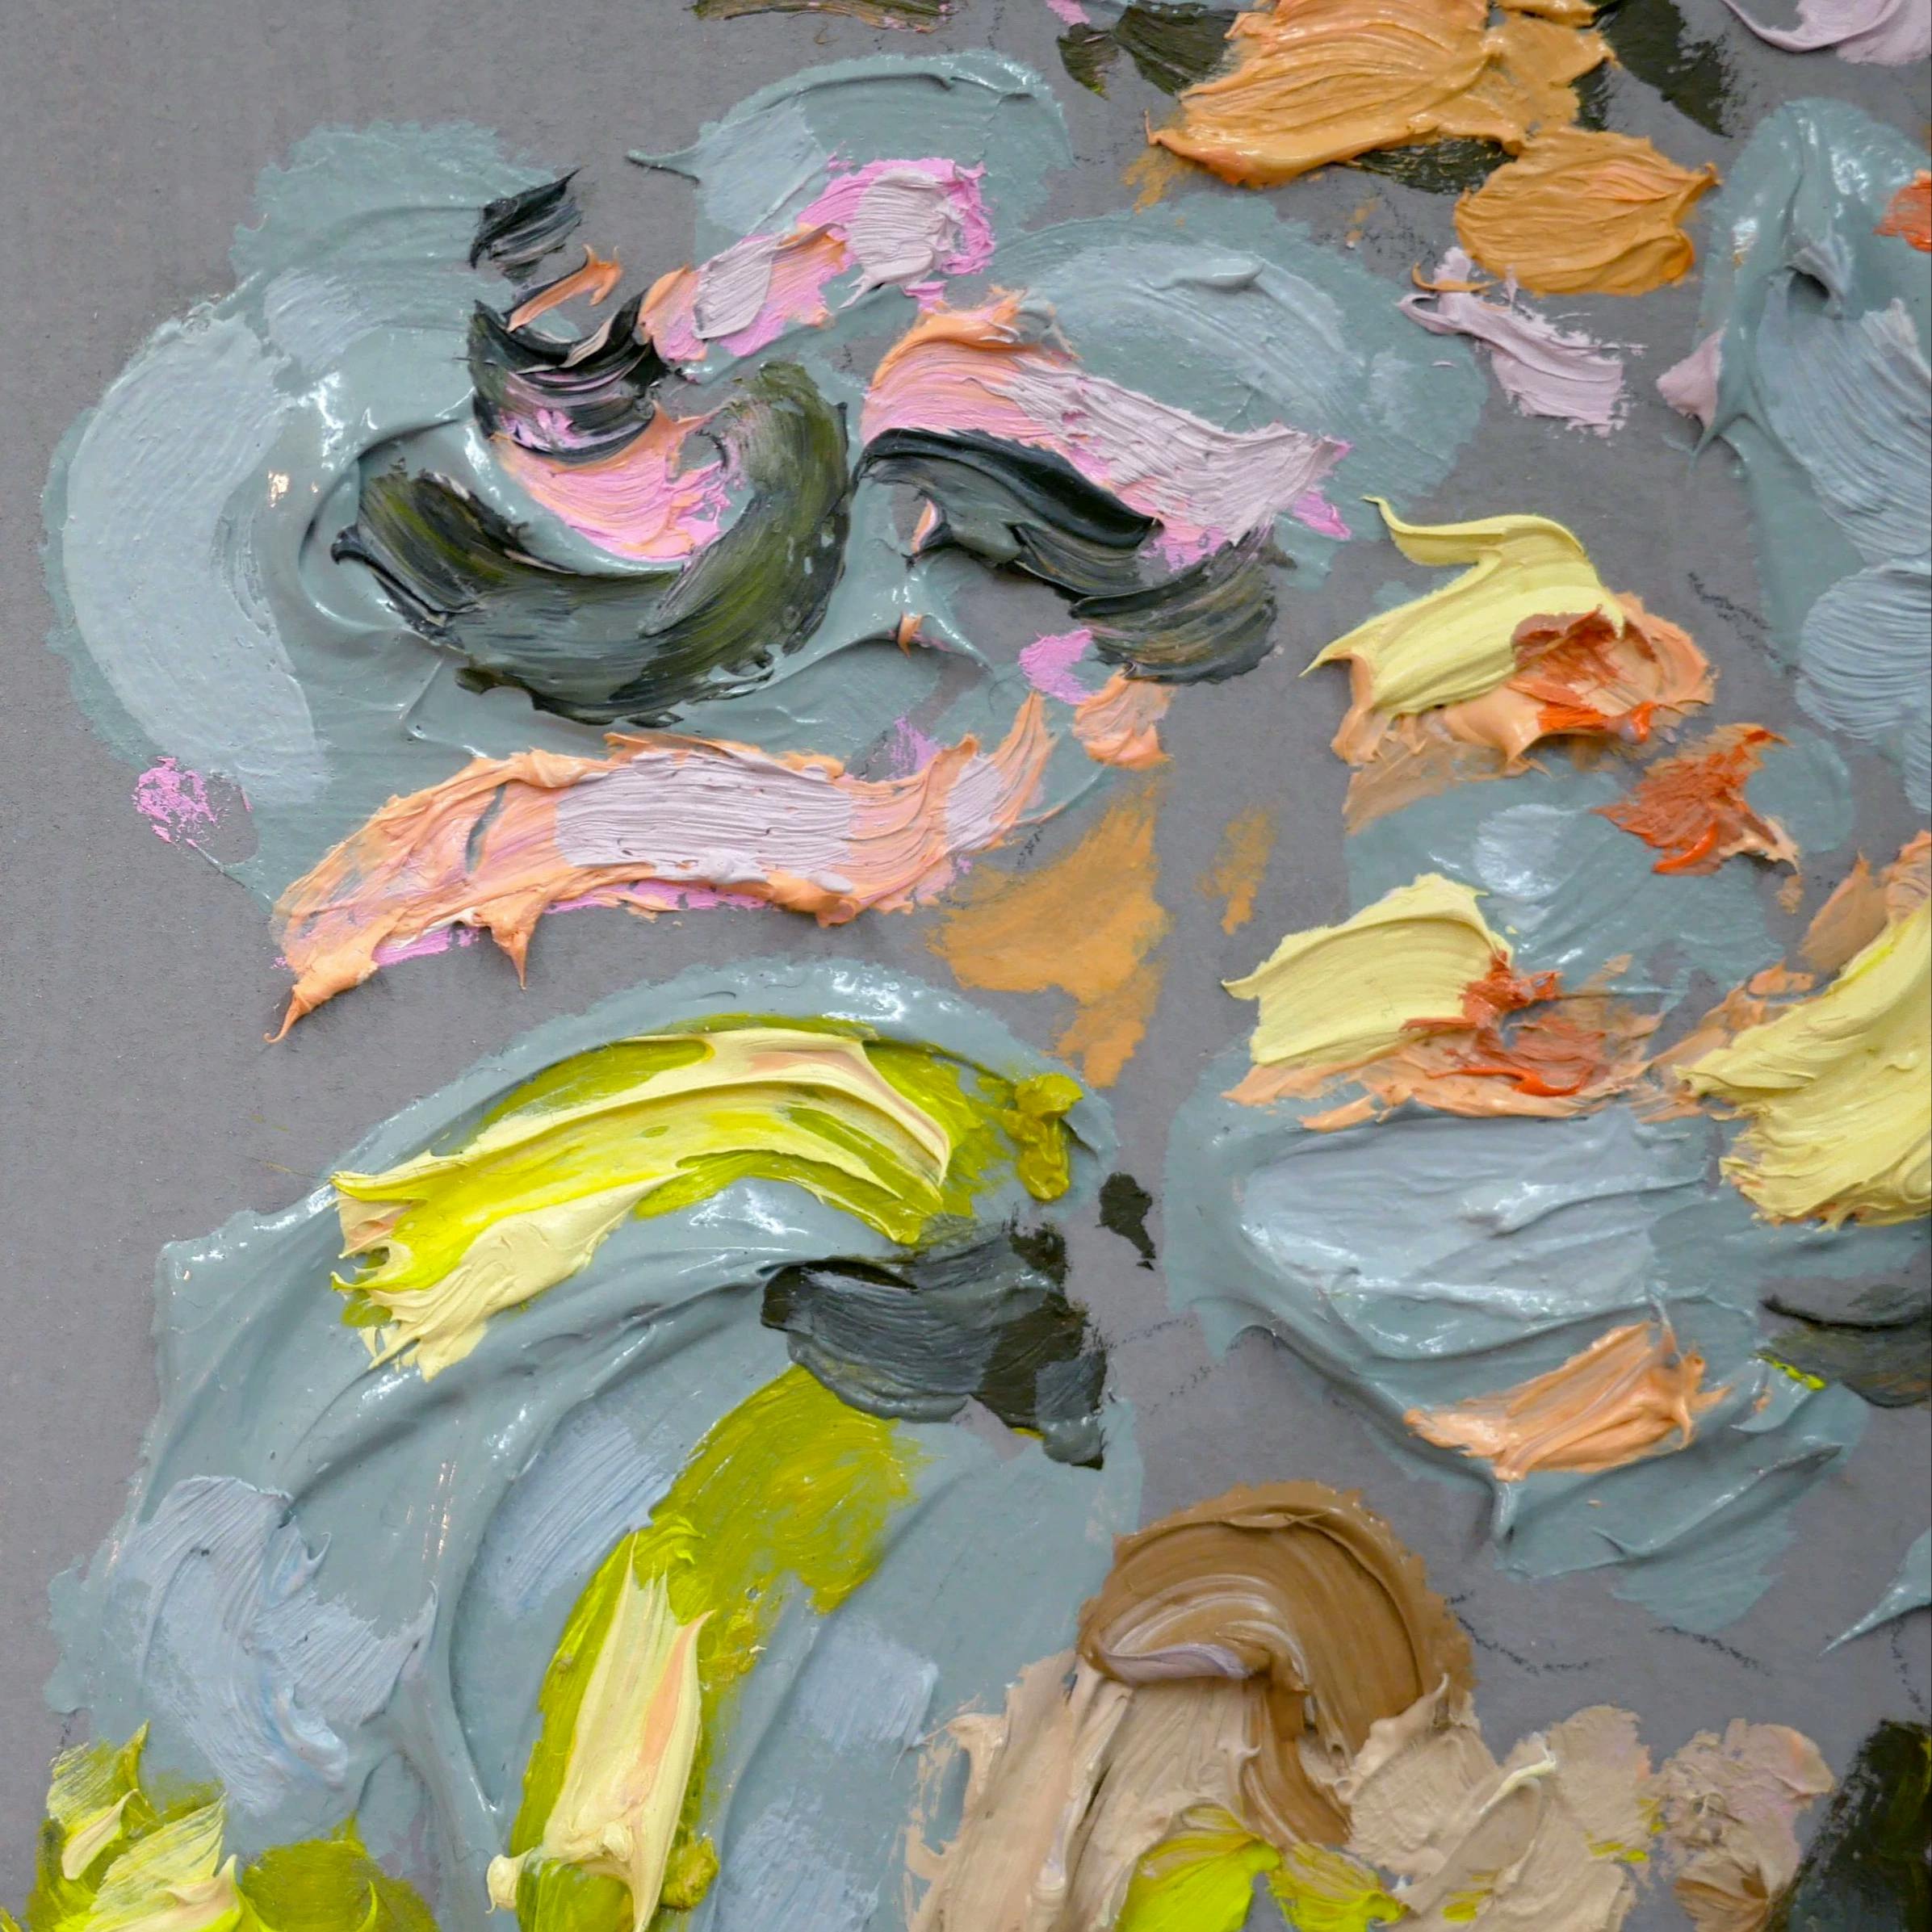 A close-up of a painting by Erin Lynn Welsh featuring swirls of dusty blue, pink, chartreuse, and black paint.